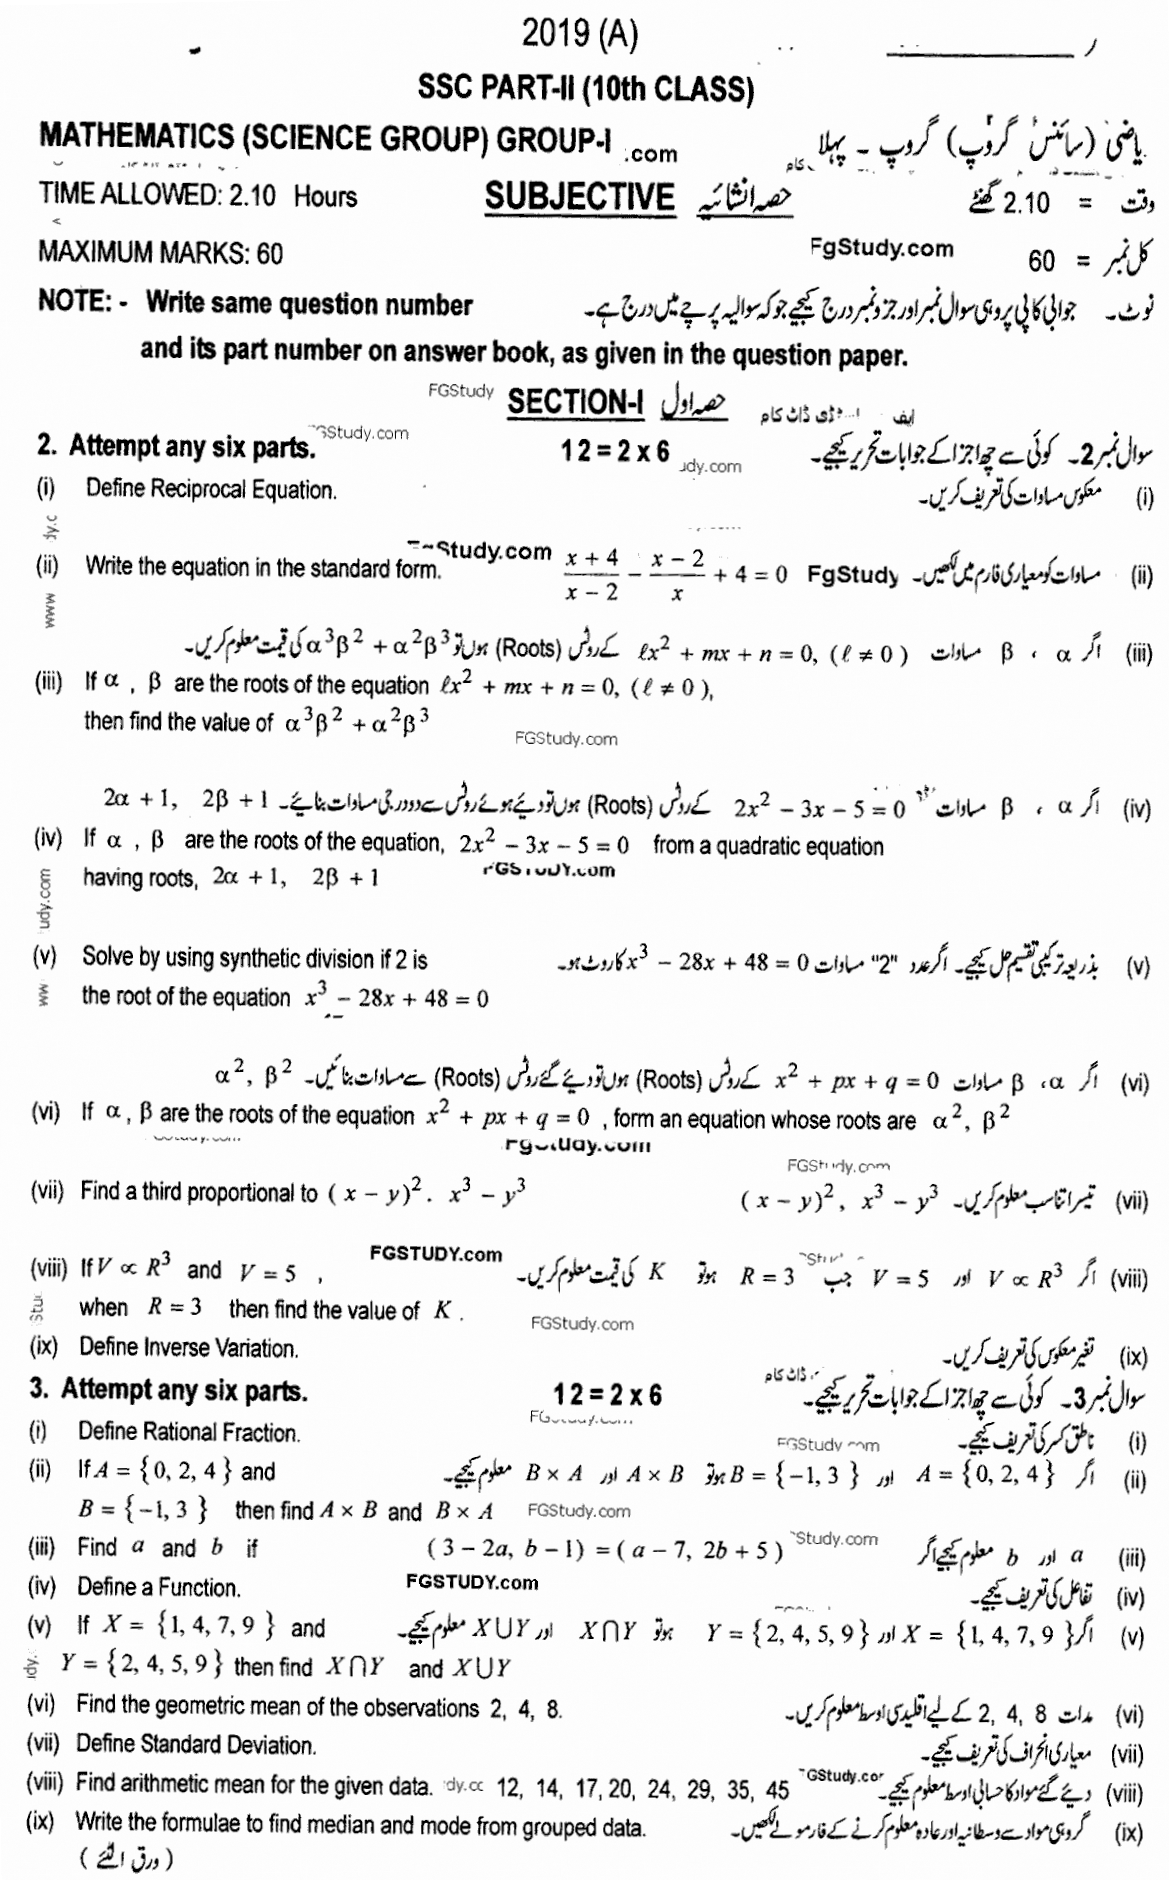 Math Group 1 Subjective 10th Class Past Papers 2019